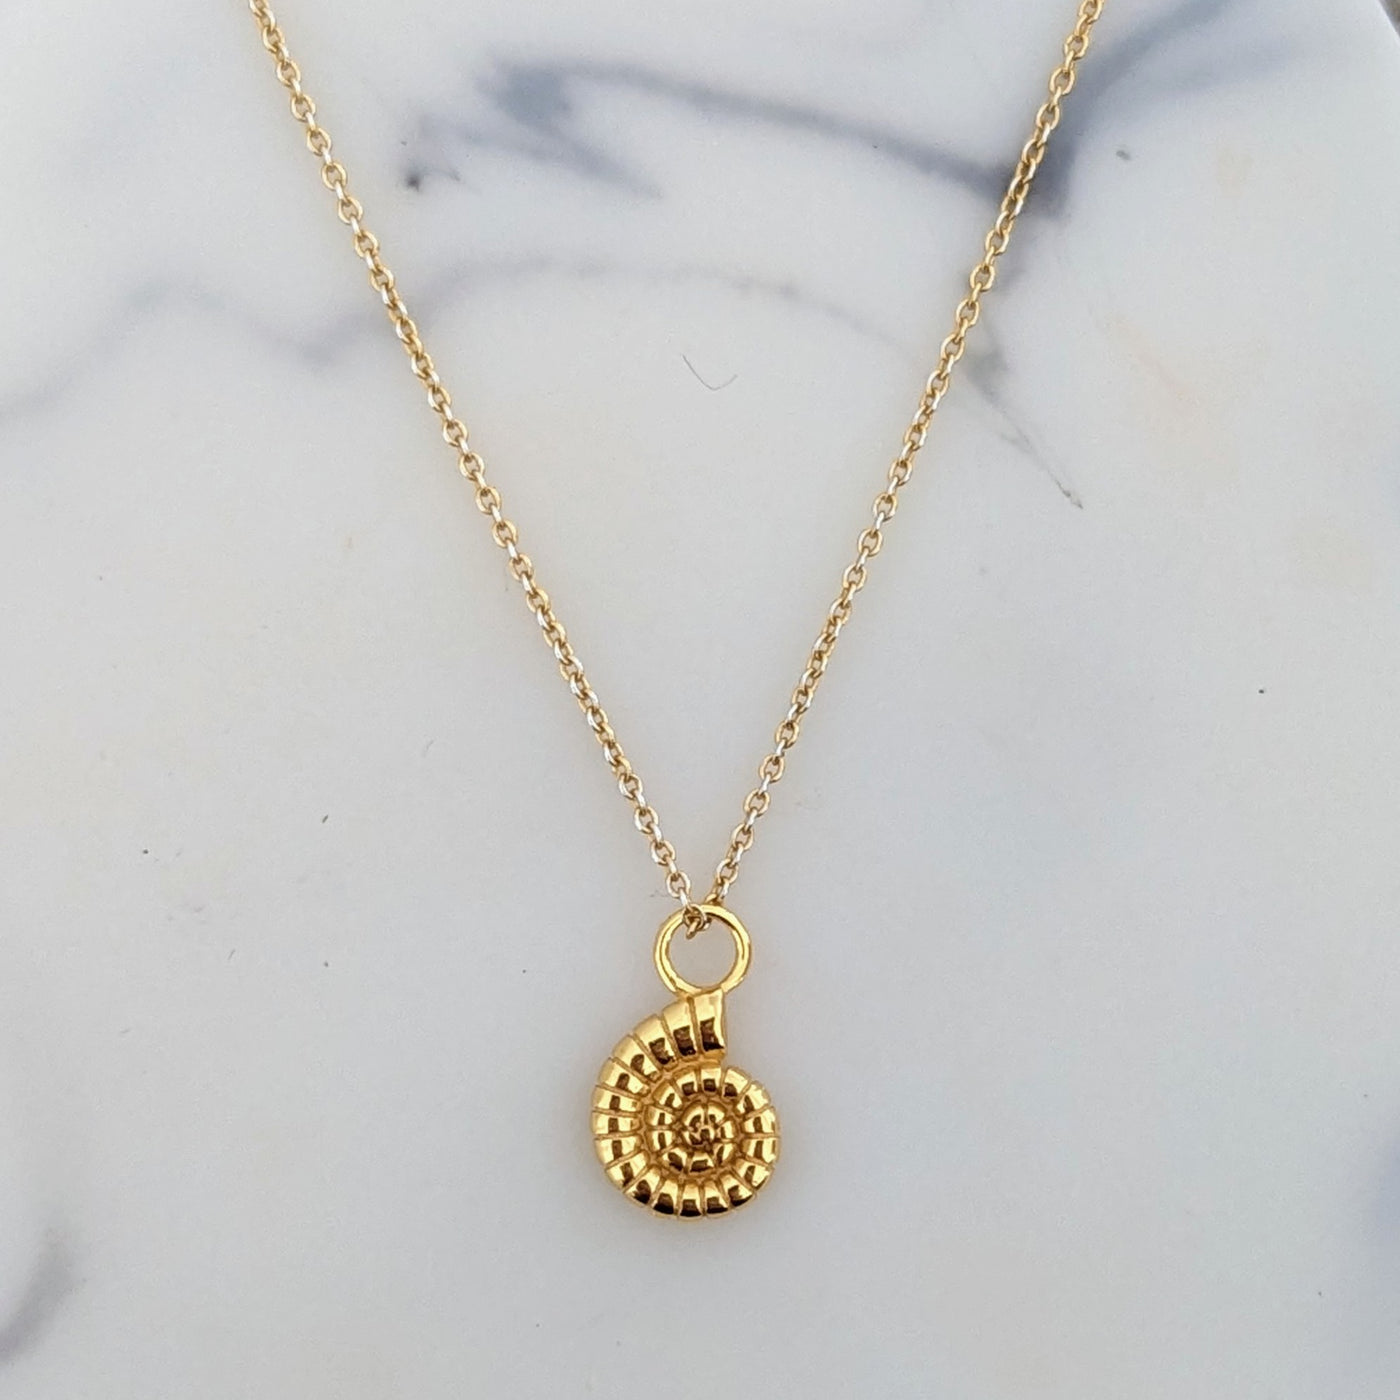 Gold plated ammonite pendant necklace